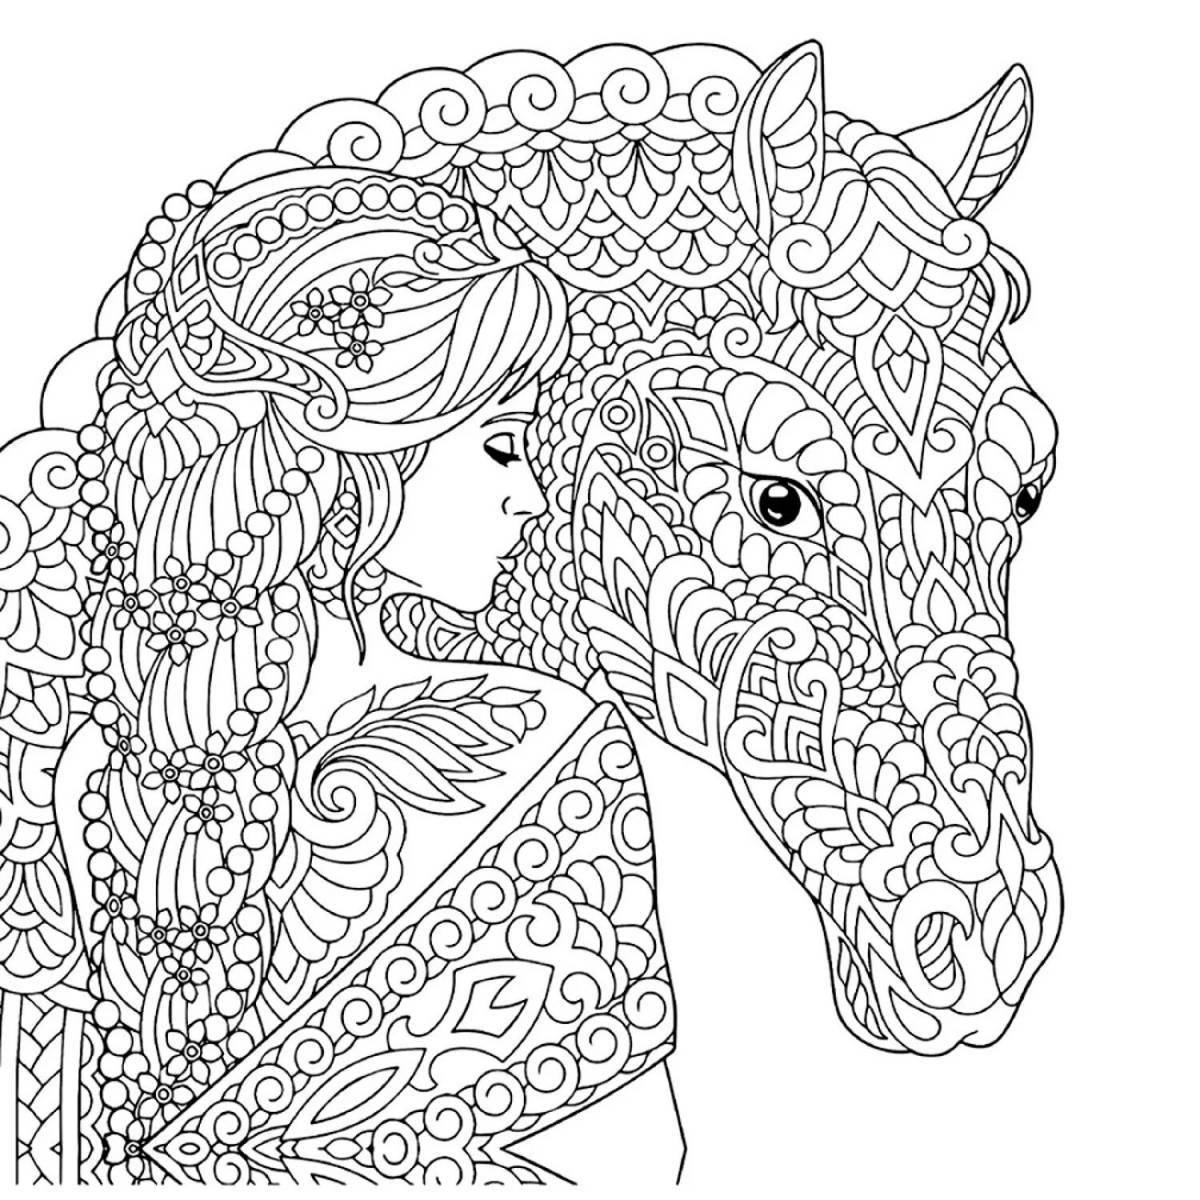 Generous coloring book for girls 9-10 years old